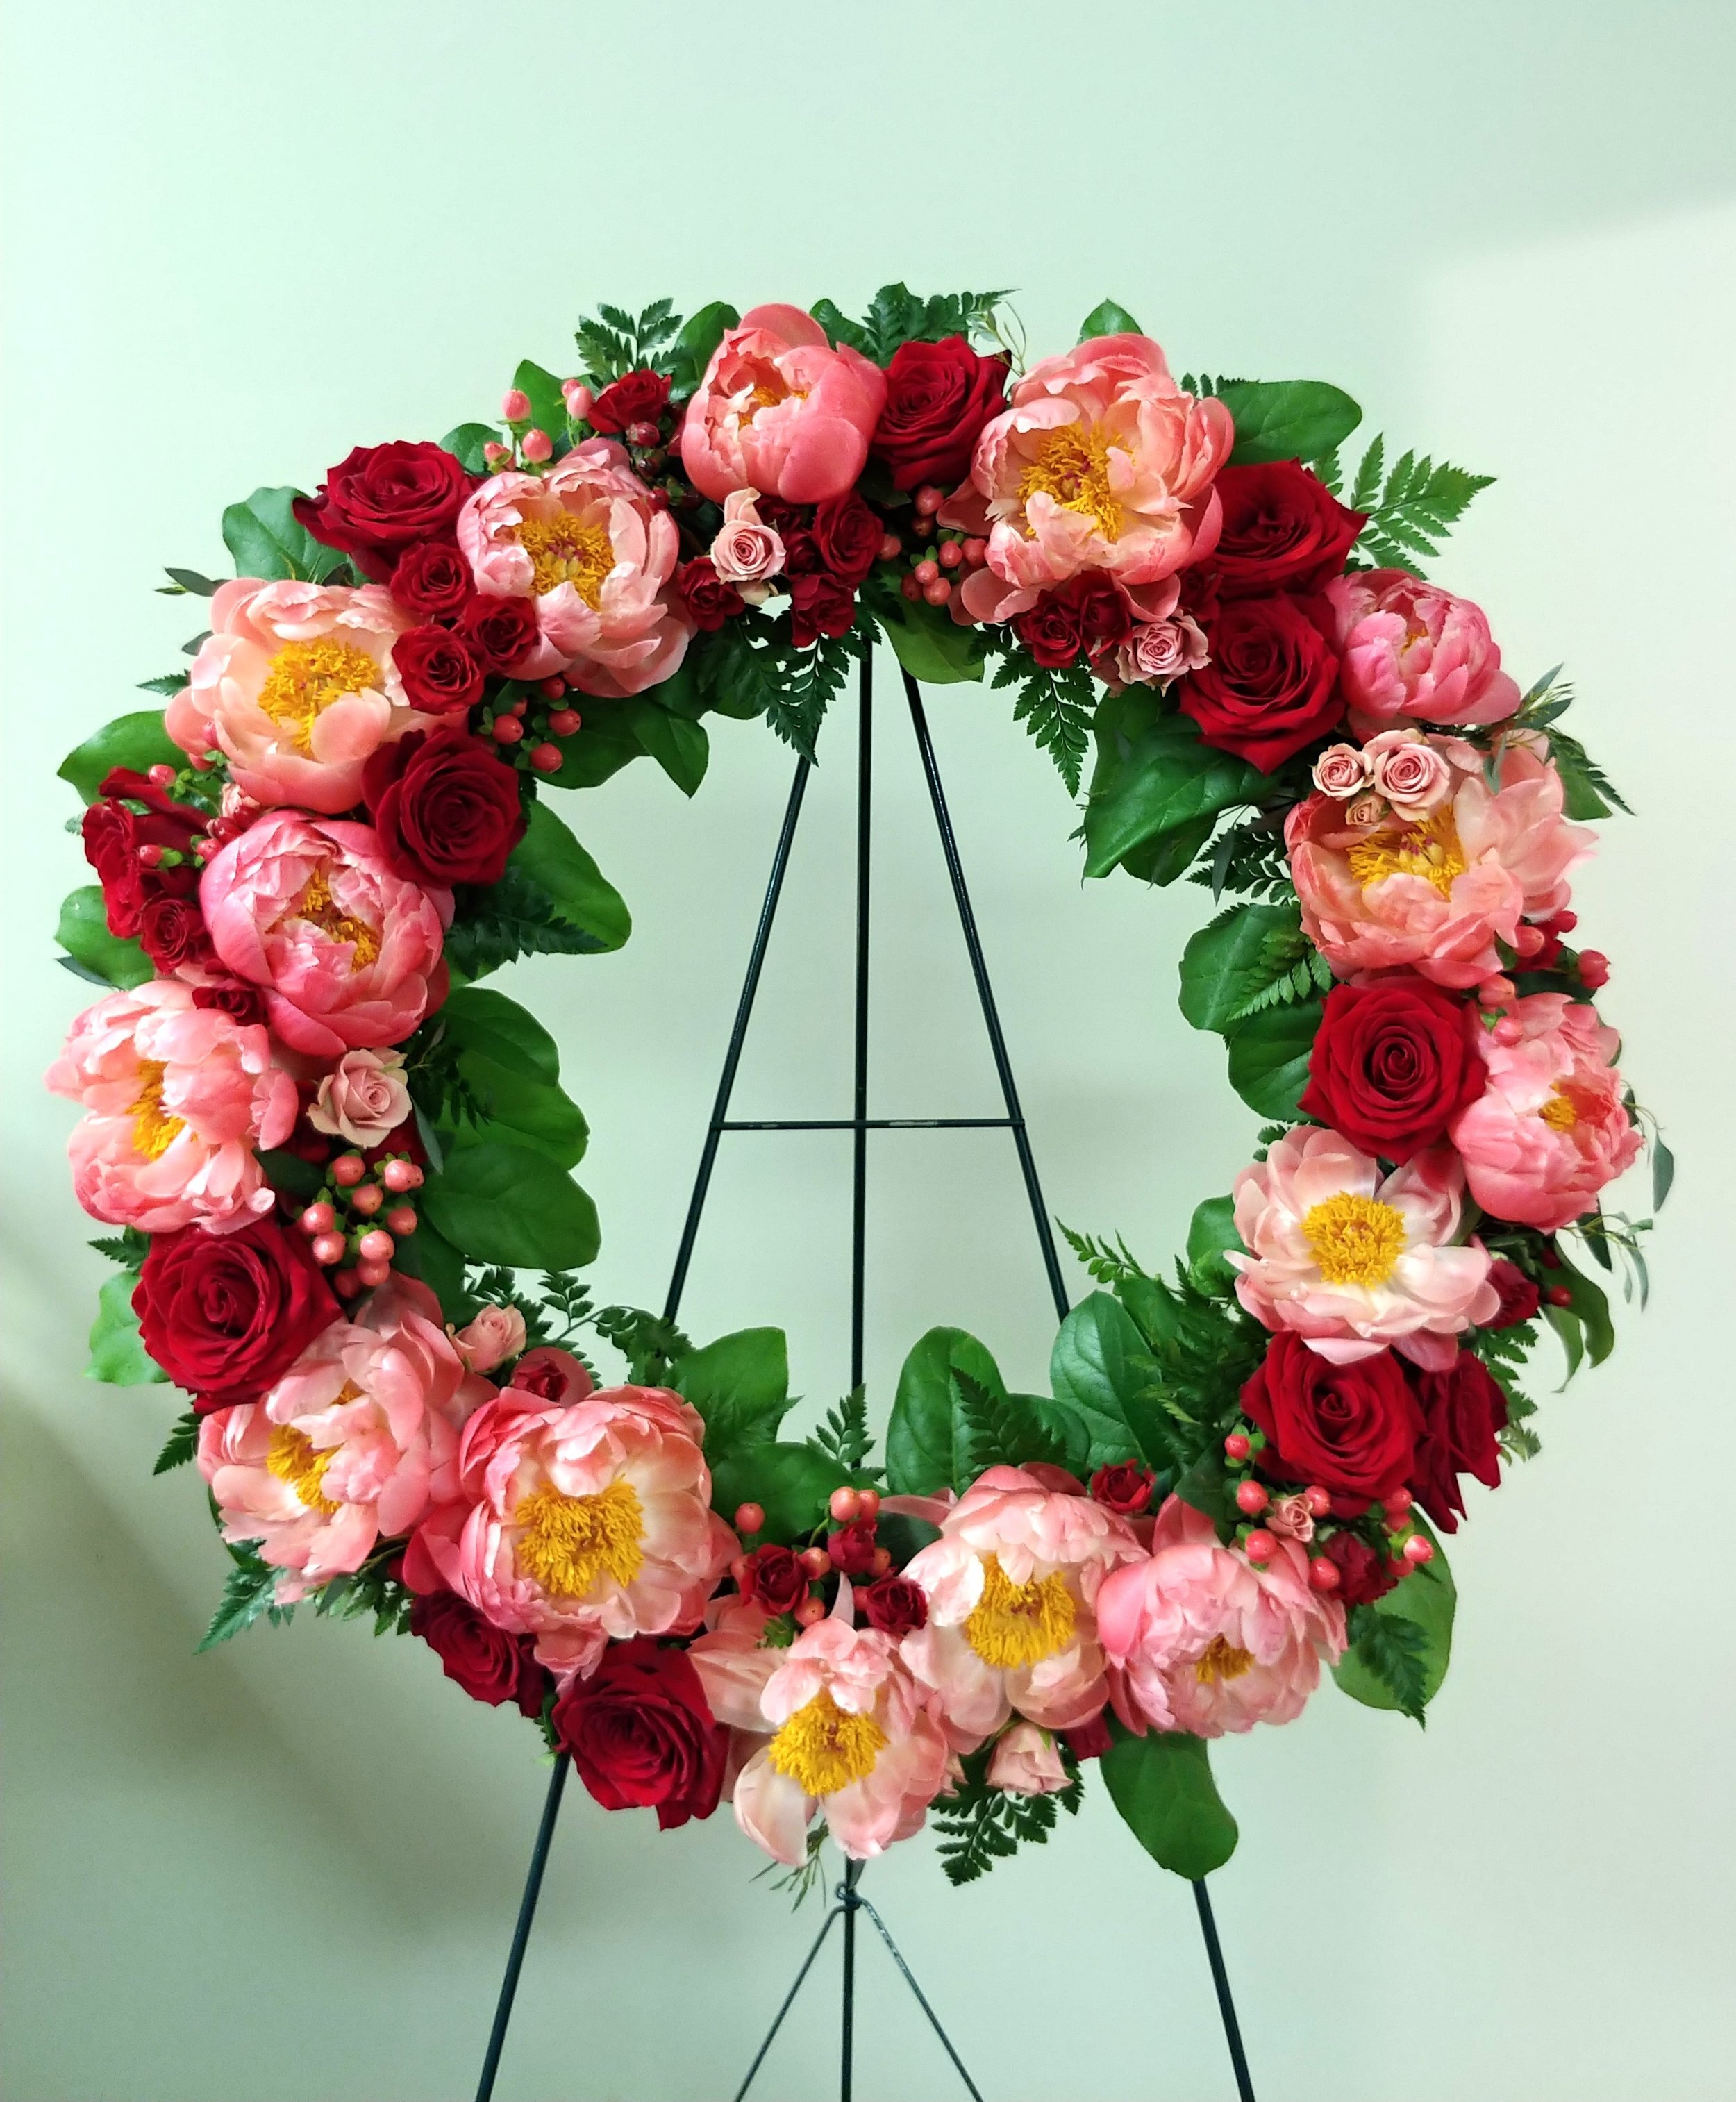 $400 Large wreath with Peonies and Red Roses 